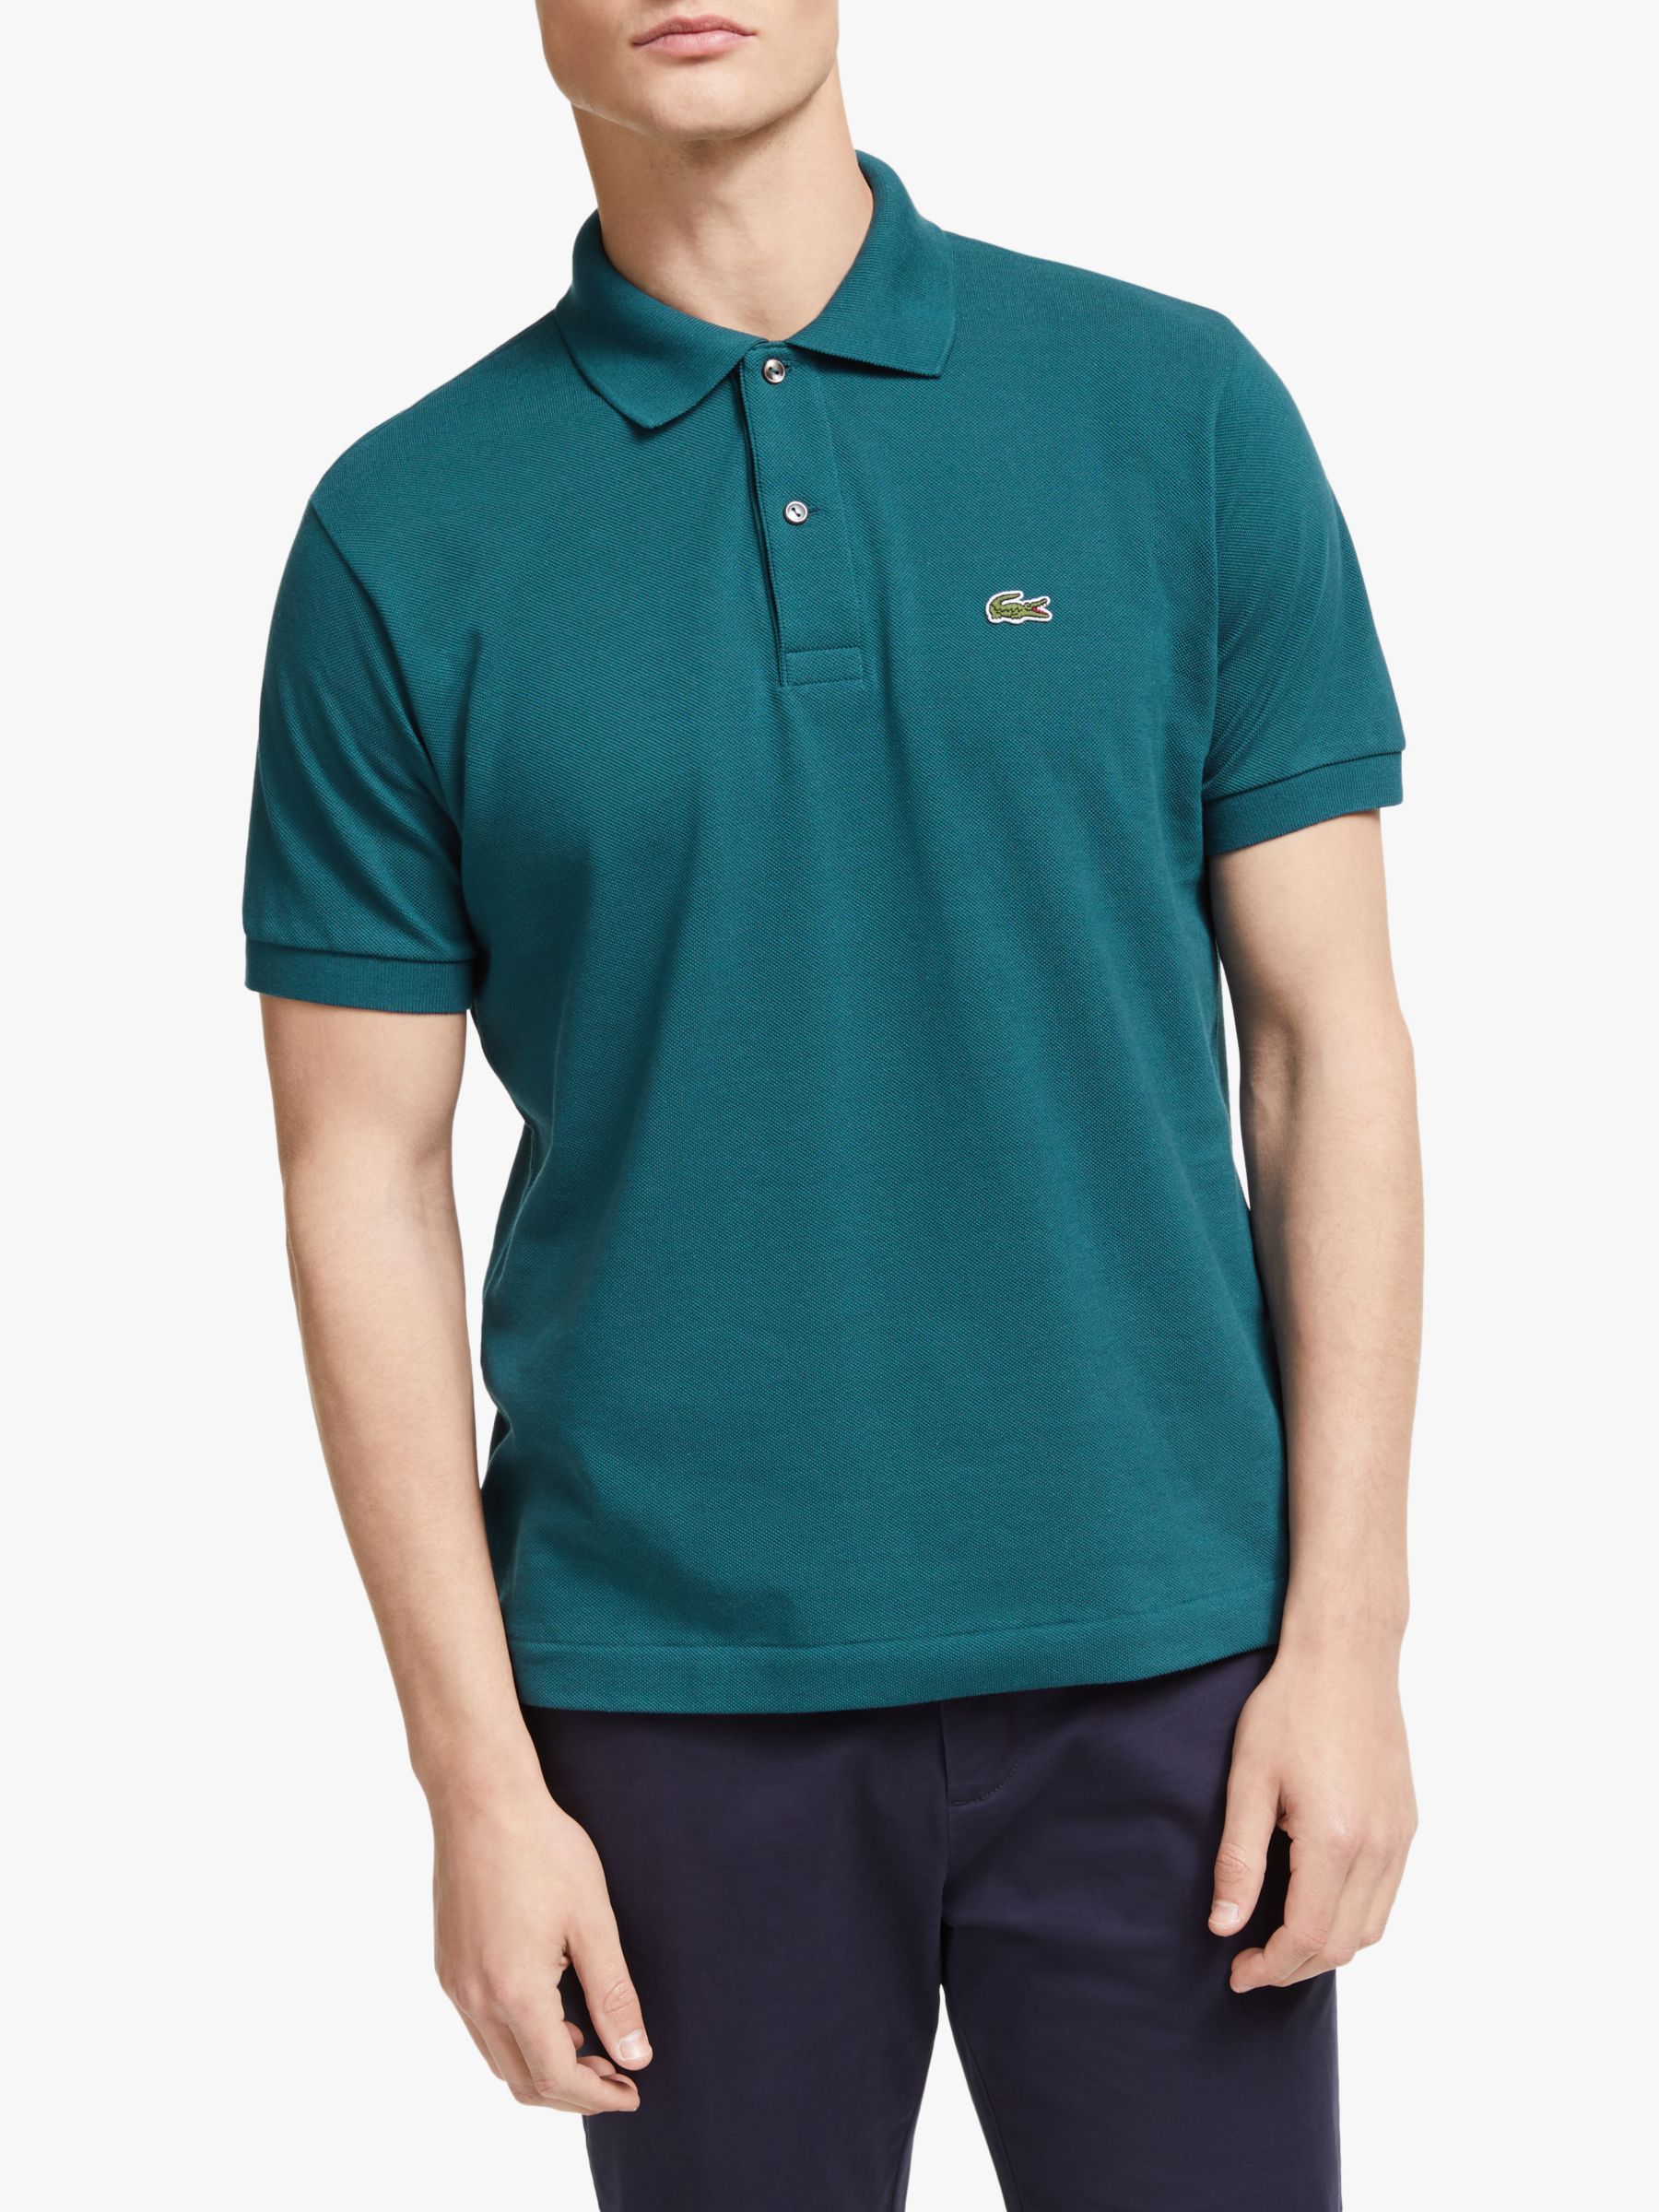 Lacoste Classic Fit Logo Polo Shirt at John Lewis & Partners